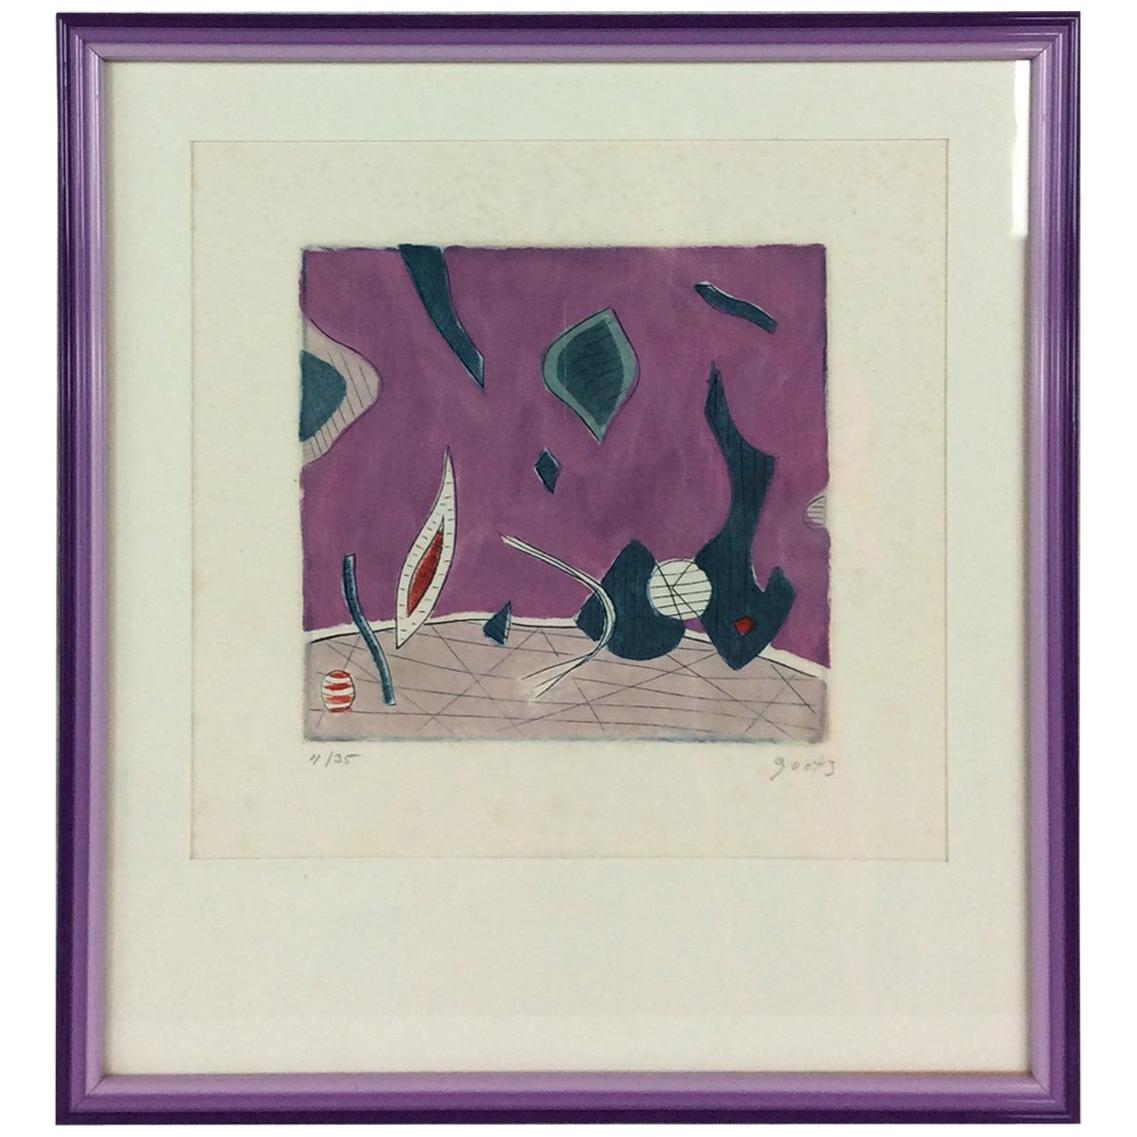 Henri Goetz Abstract Composition Signed Lithograph, circa 1960s